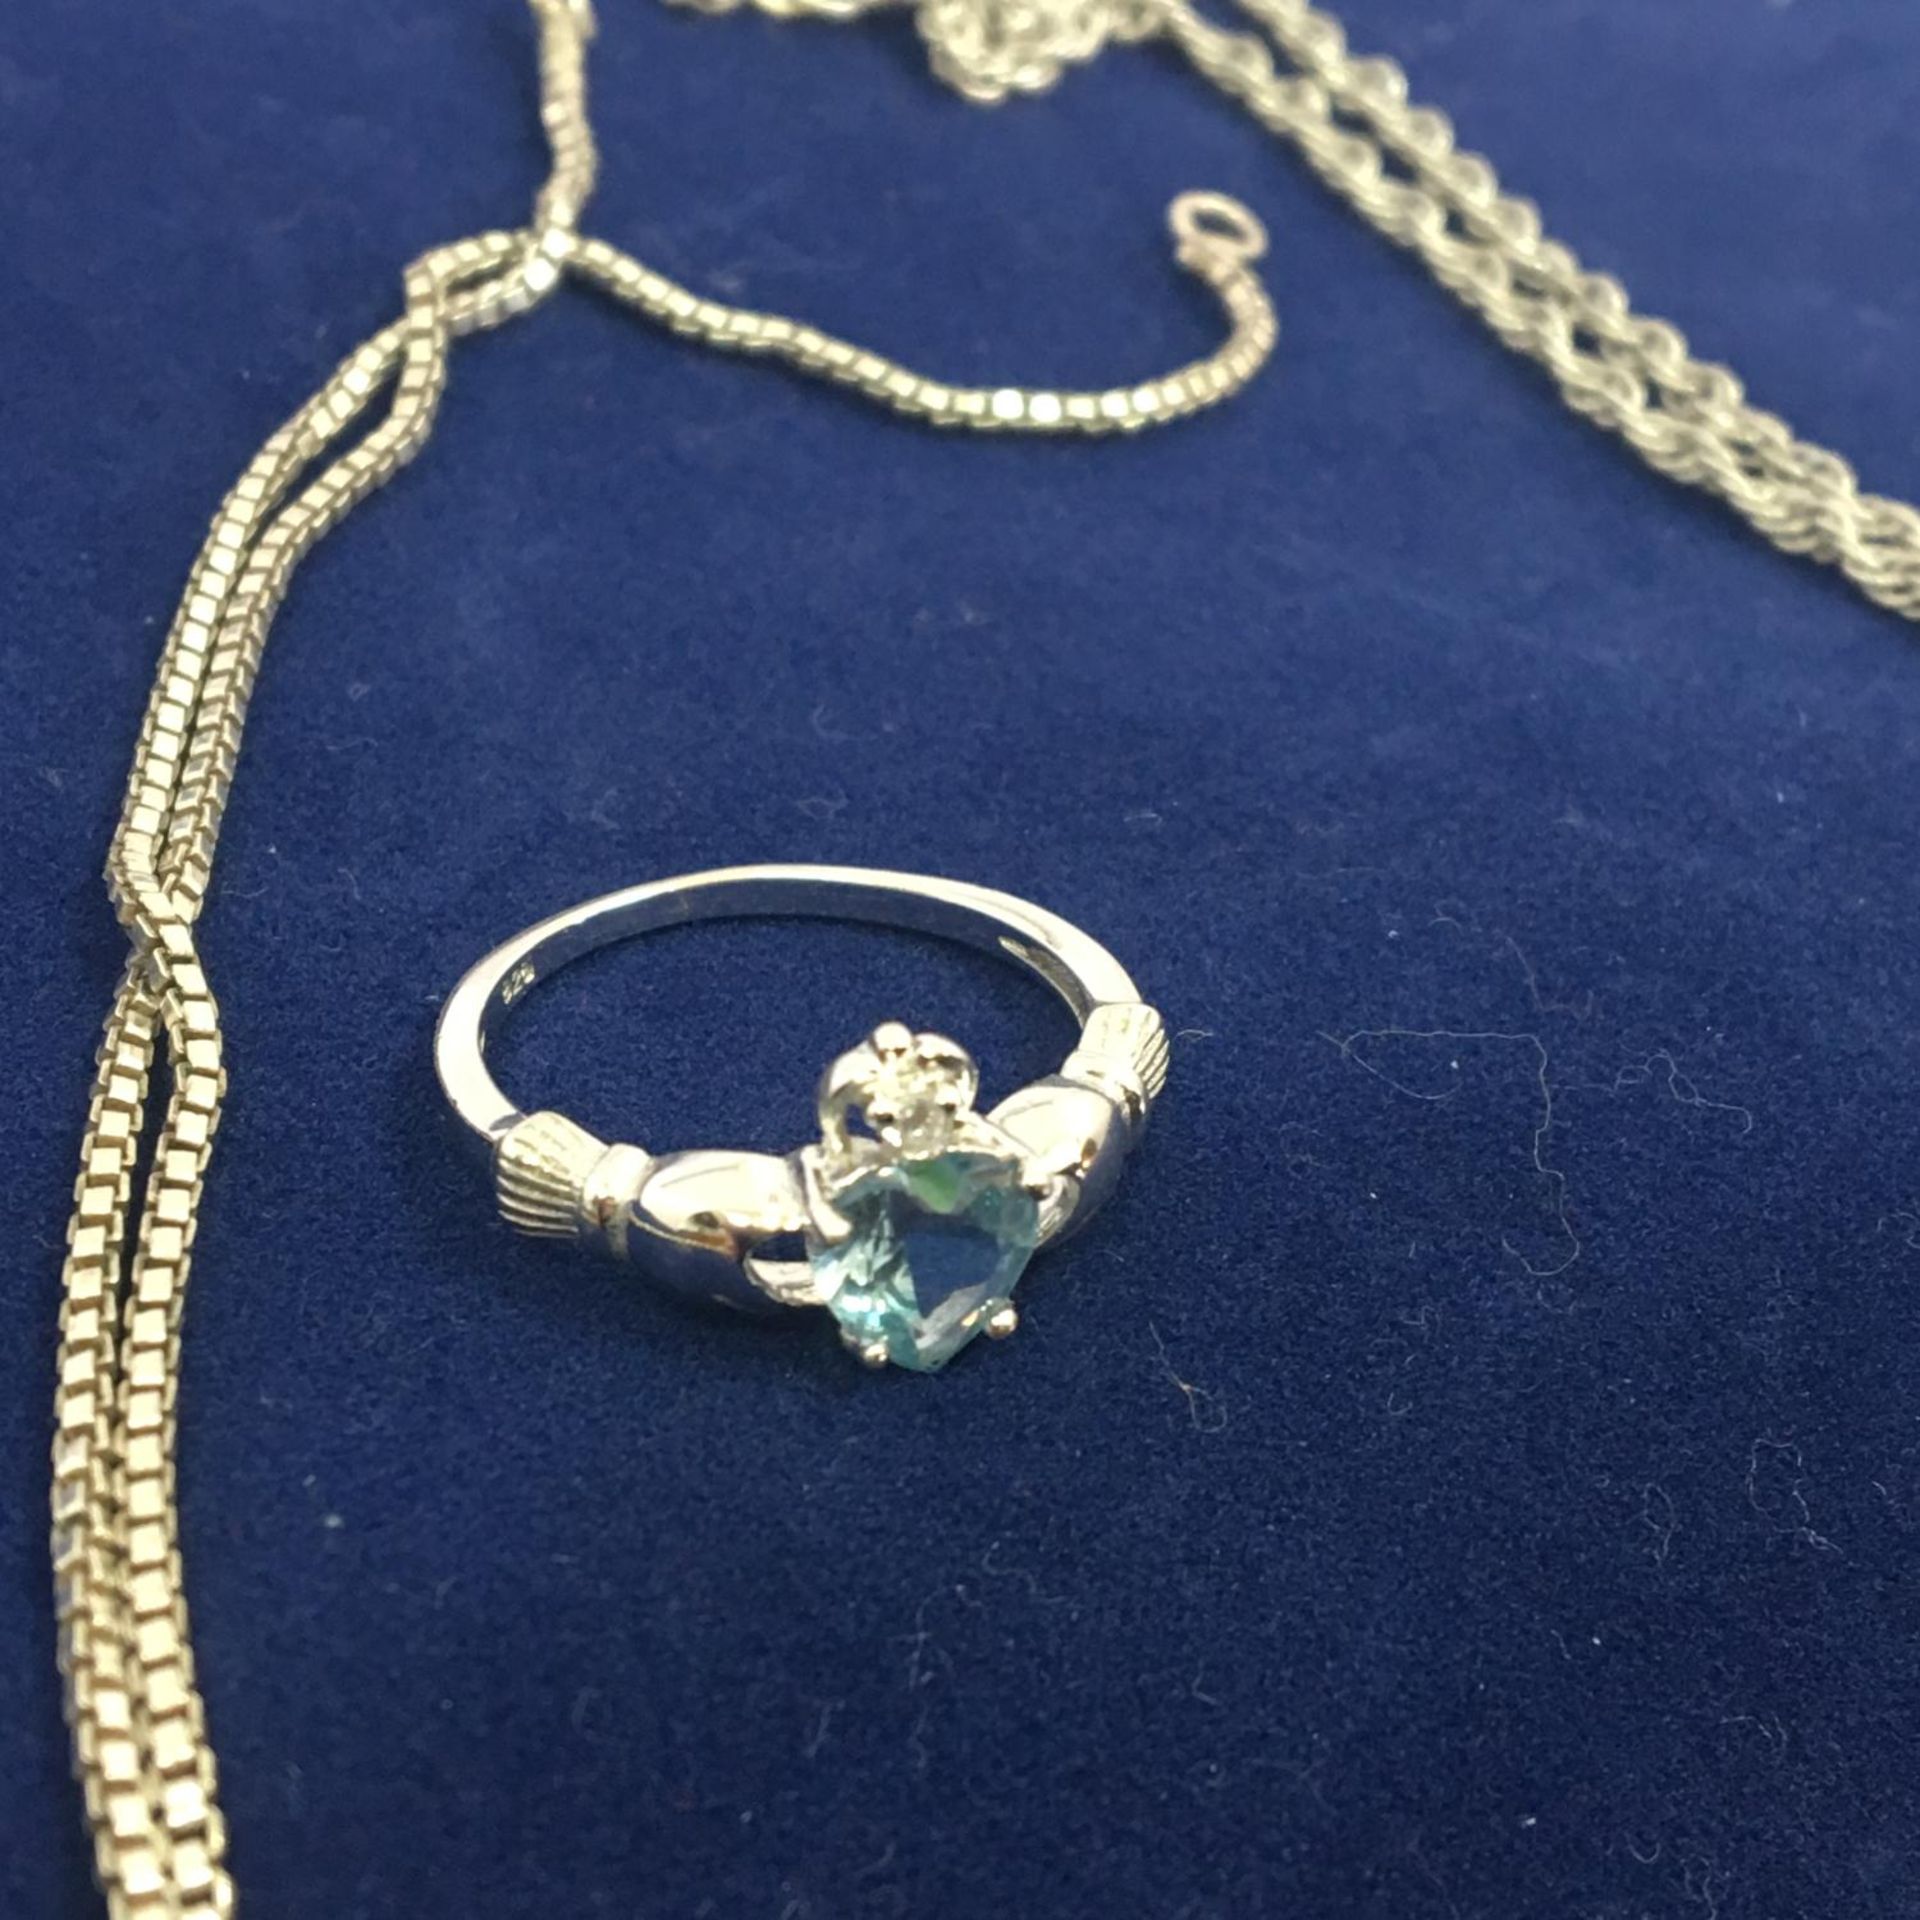 A selection of pre-owned 925 silver jewellery to include a blue stone claddagh ring and two chains - Image 2 of 2